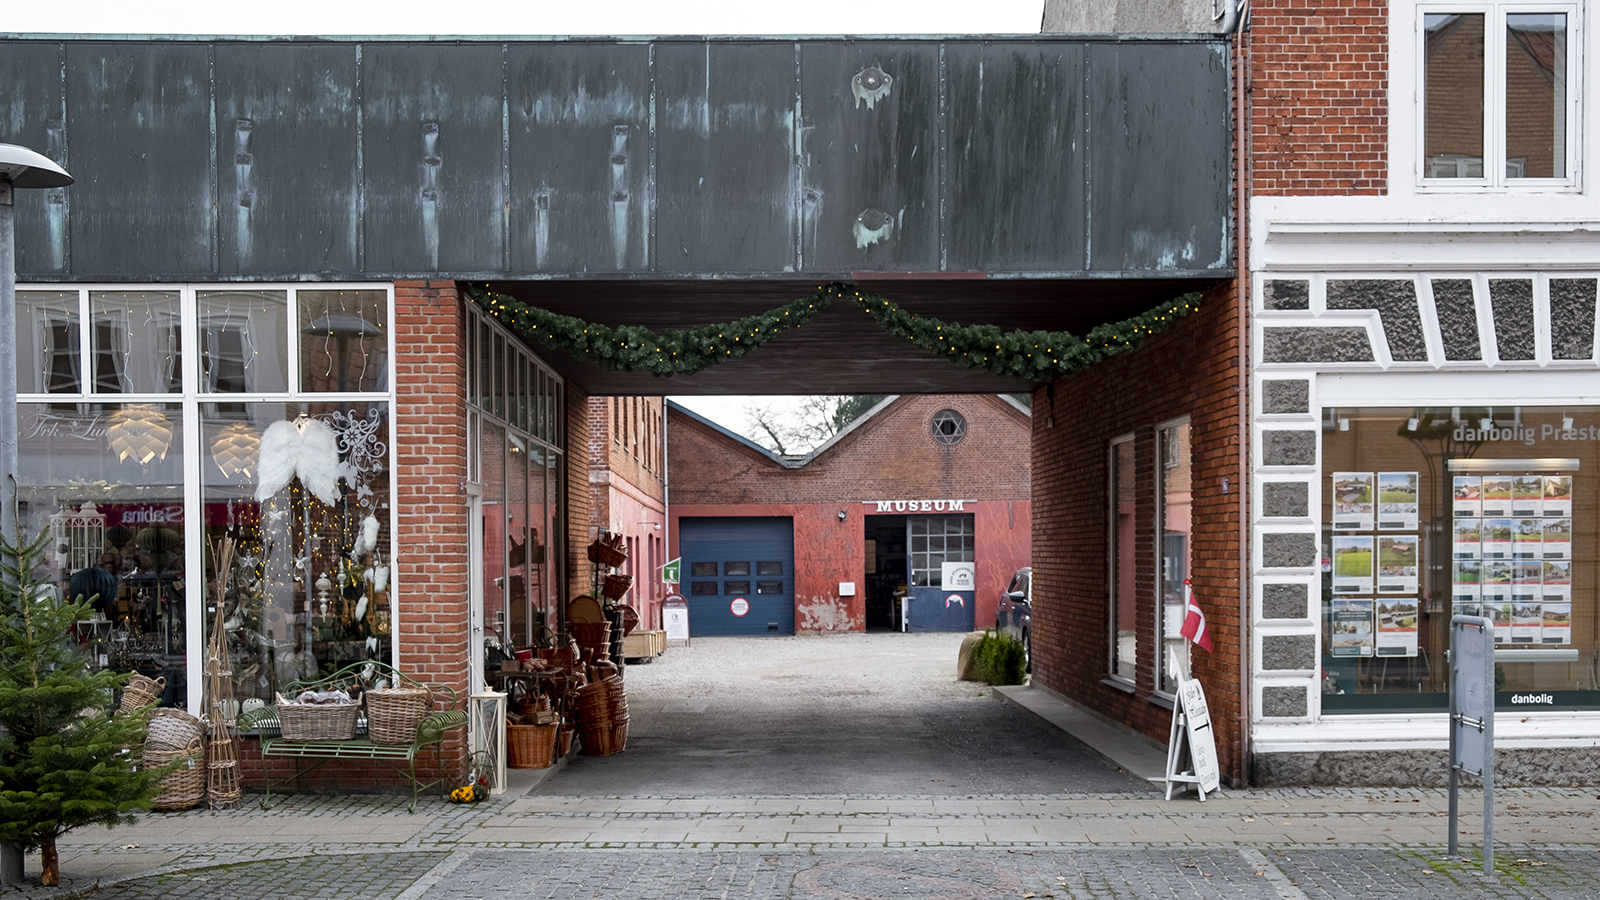 The gate connects the foundries with Præstø main street, Adelgade. Photo credit: Kurt Rodahl Hoppe